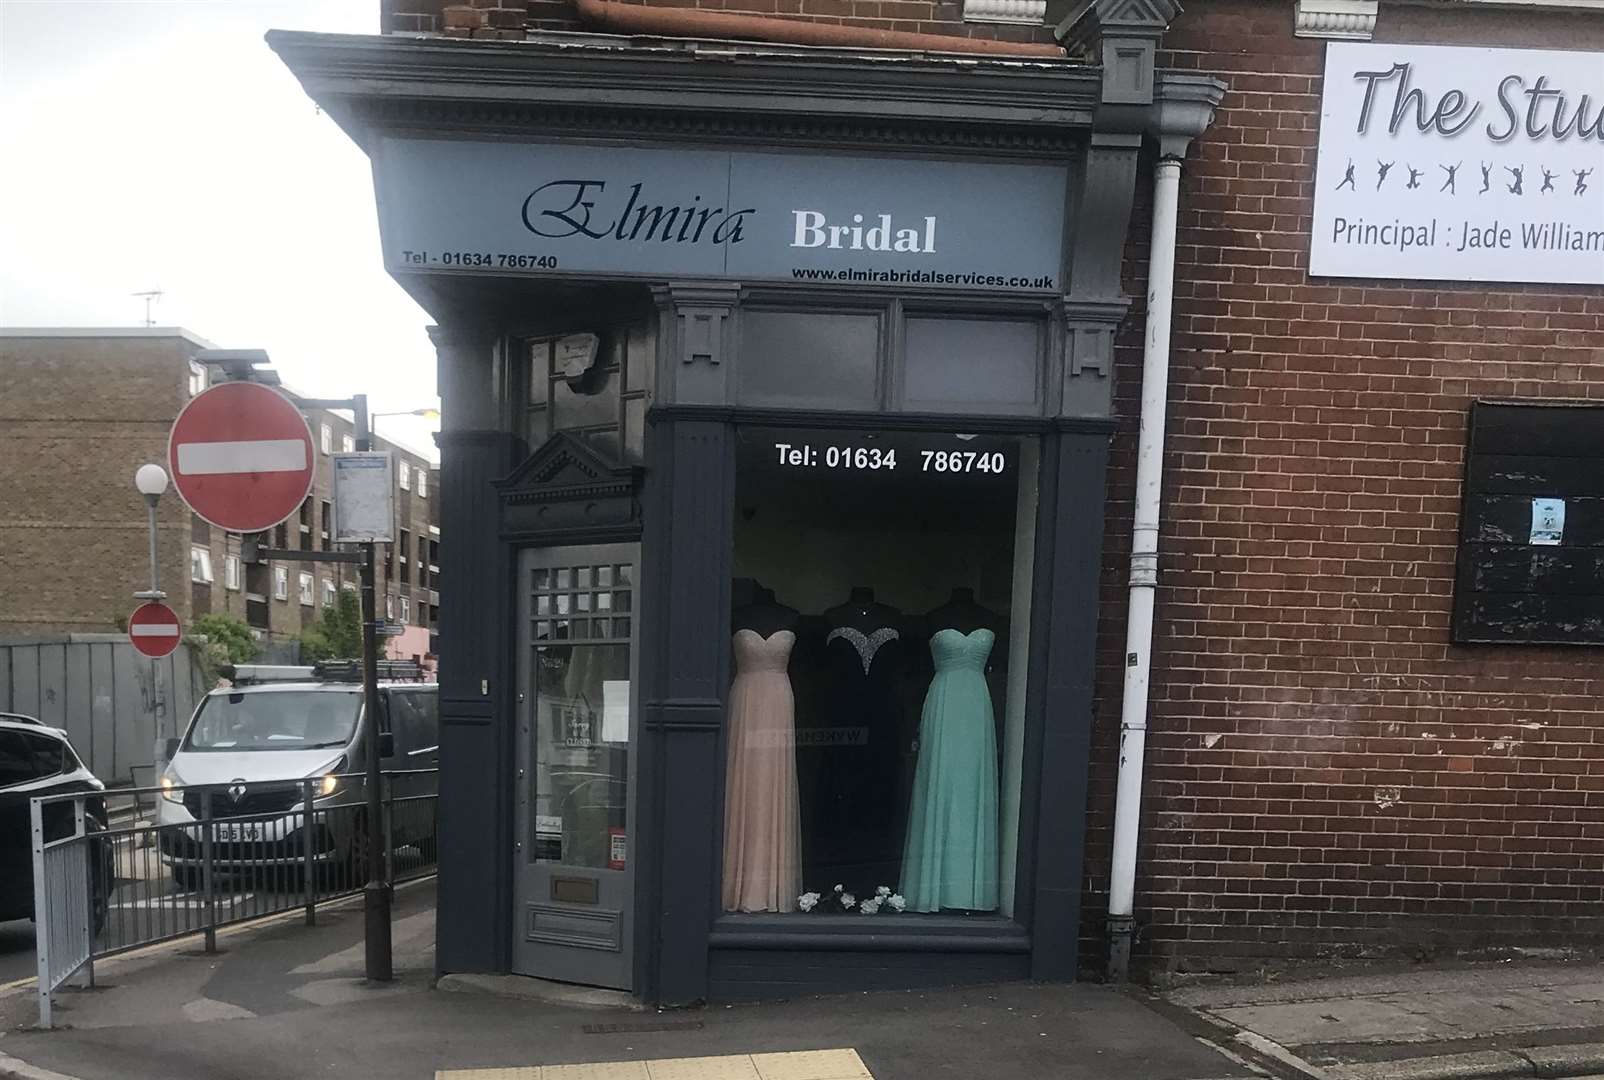 The bridal shop business will be going into liquidation